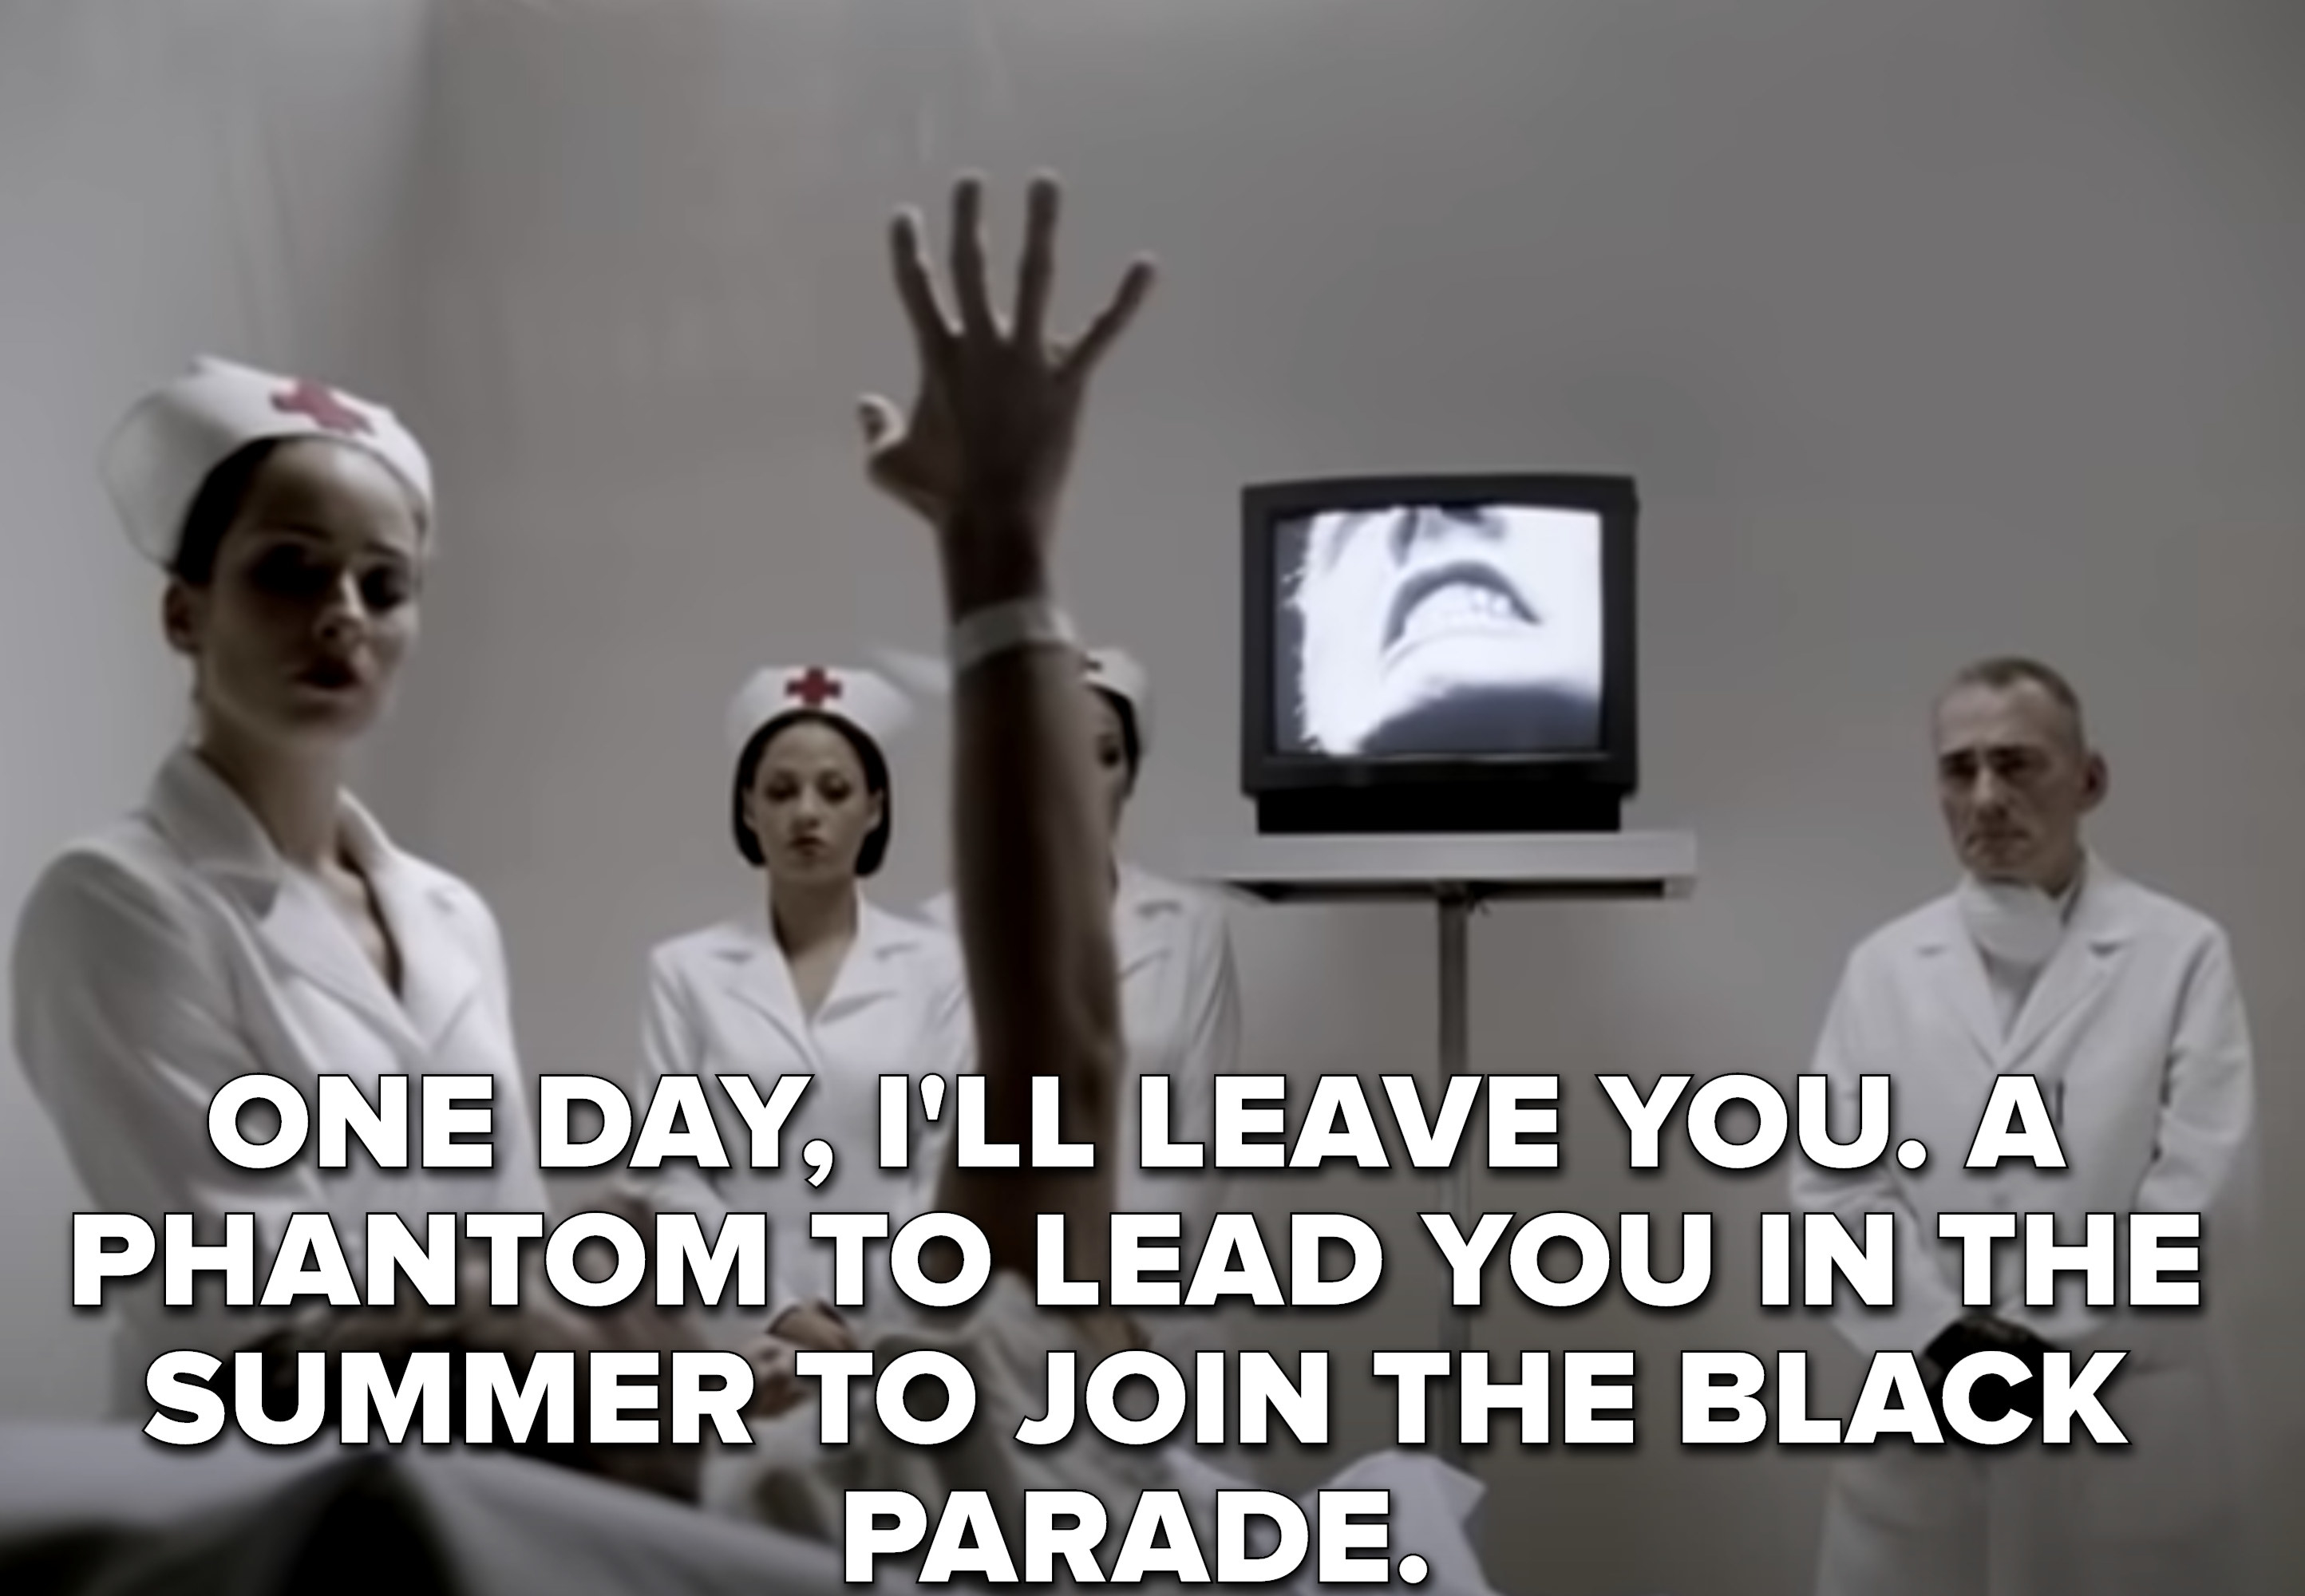 &quot;Because one day, I&#x27;ll leave you
A phantom to lead you in the summer
To join the black parade&quot;&quot;